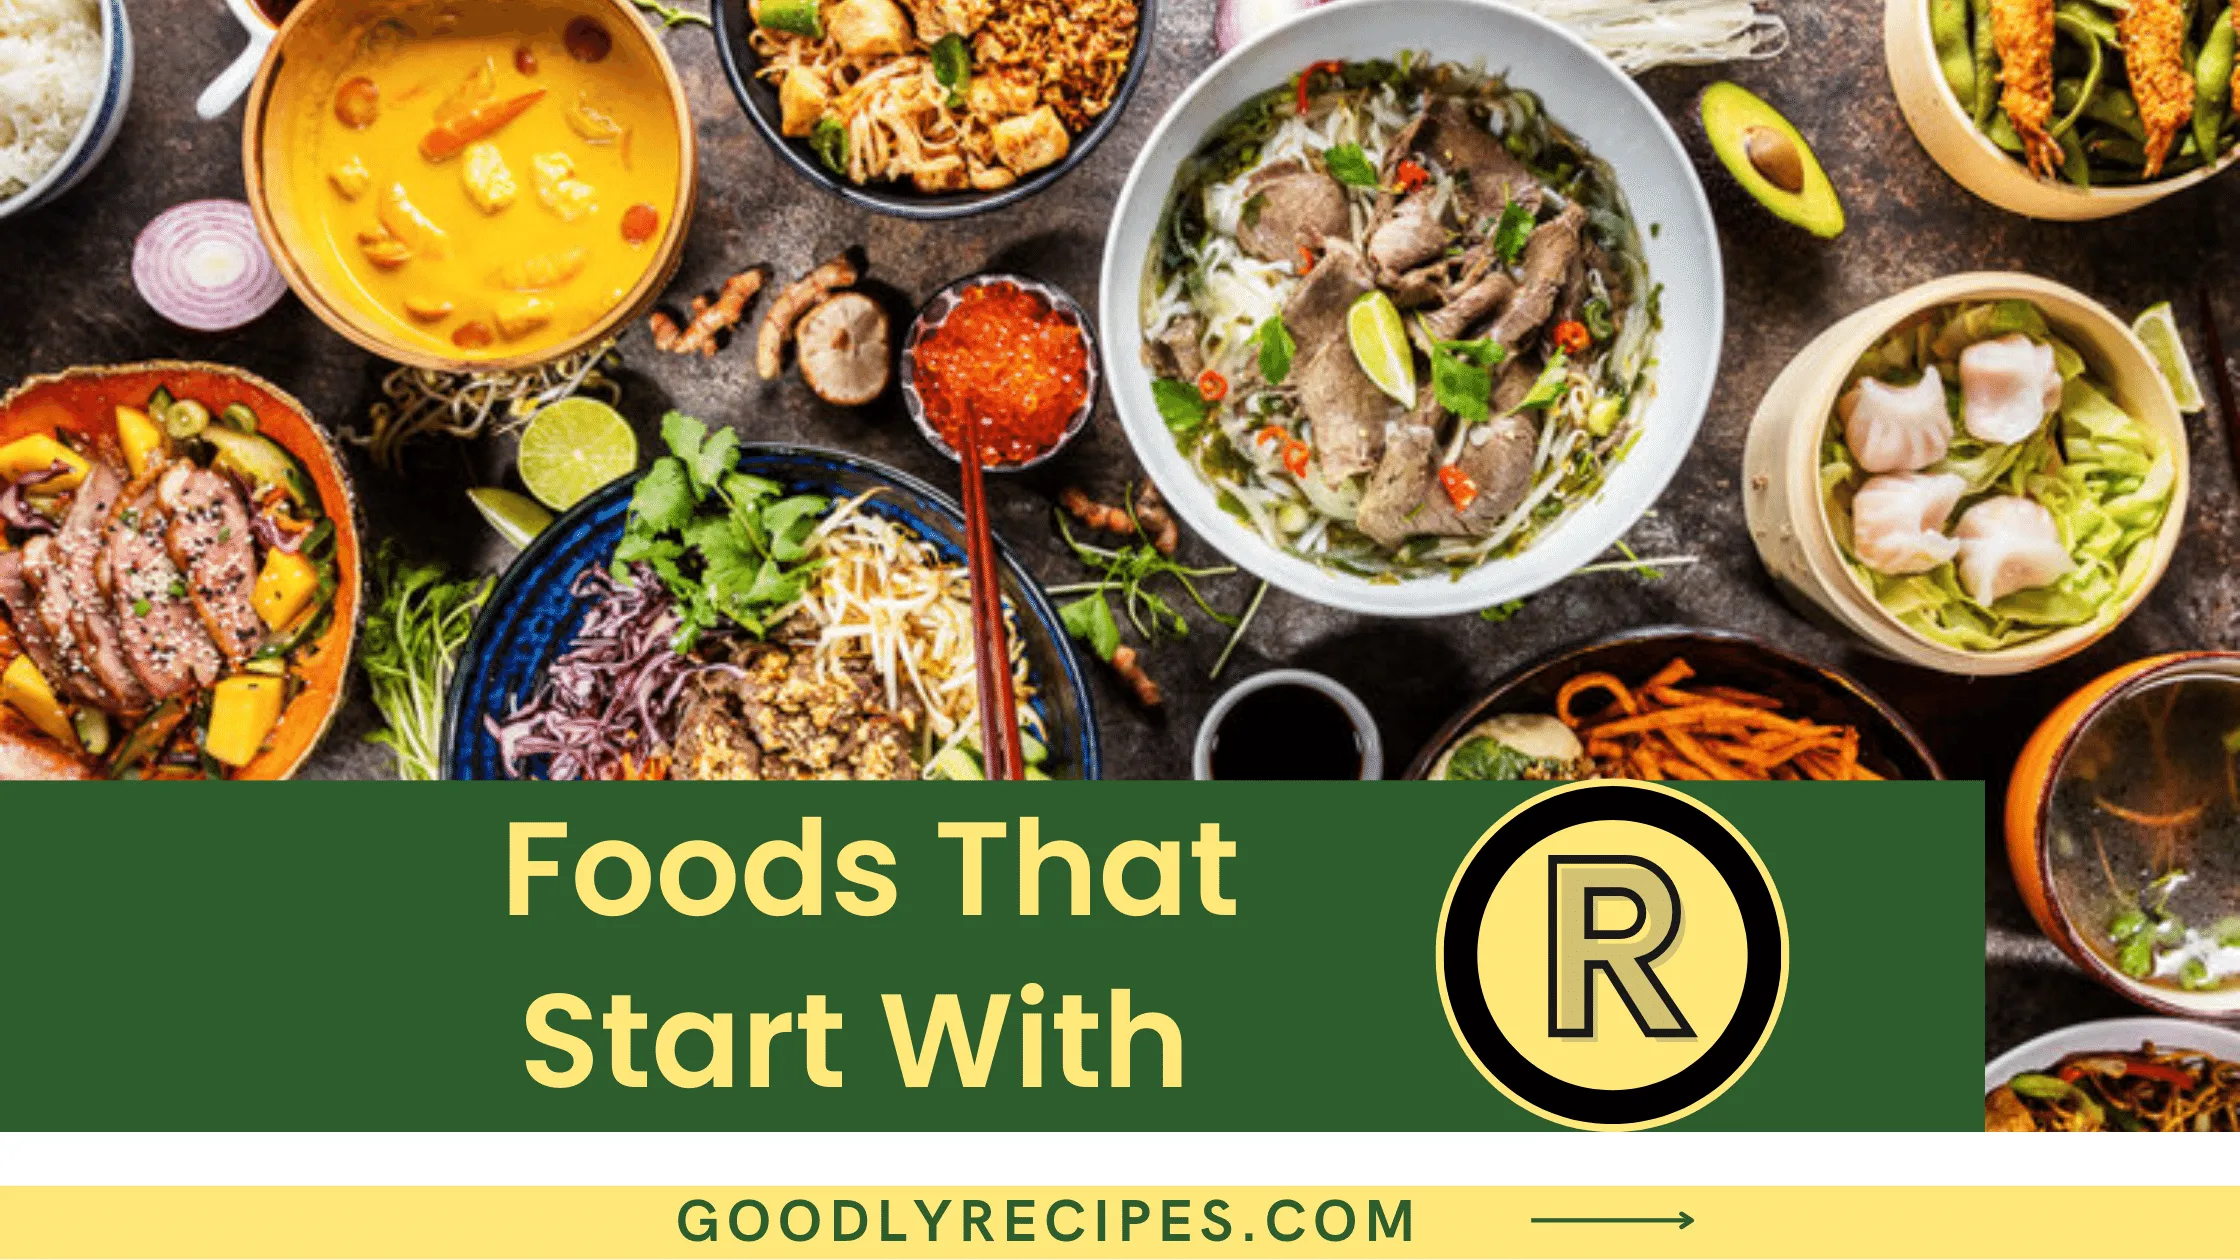 Foods That Start With R - Special Dishes